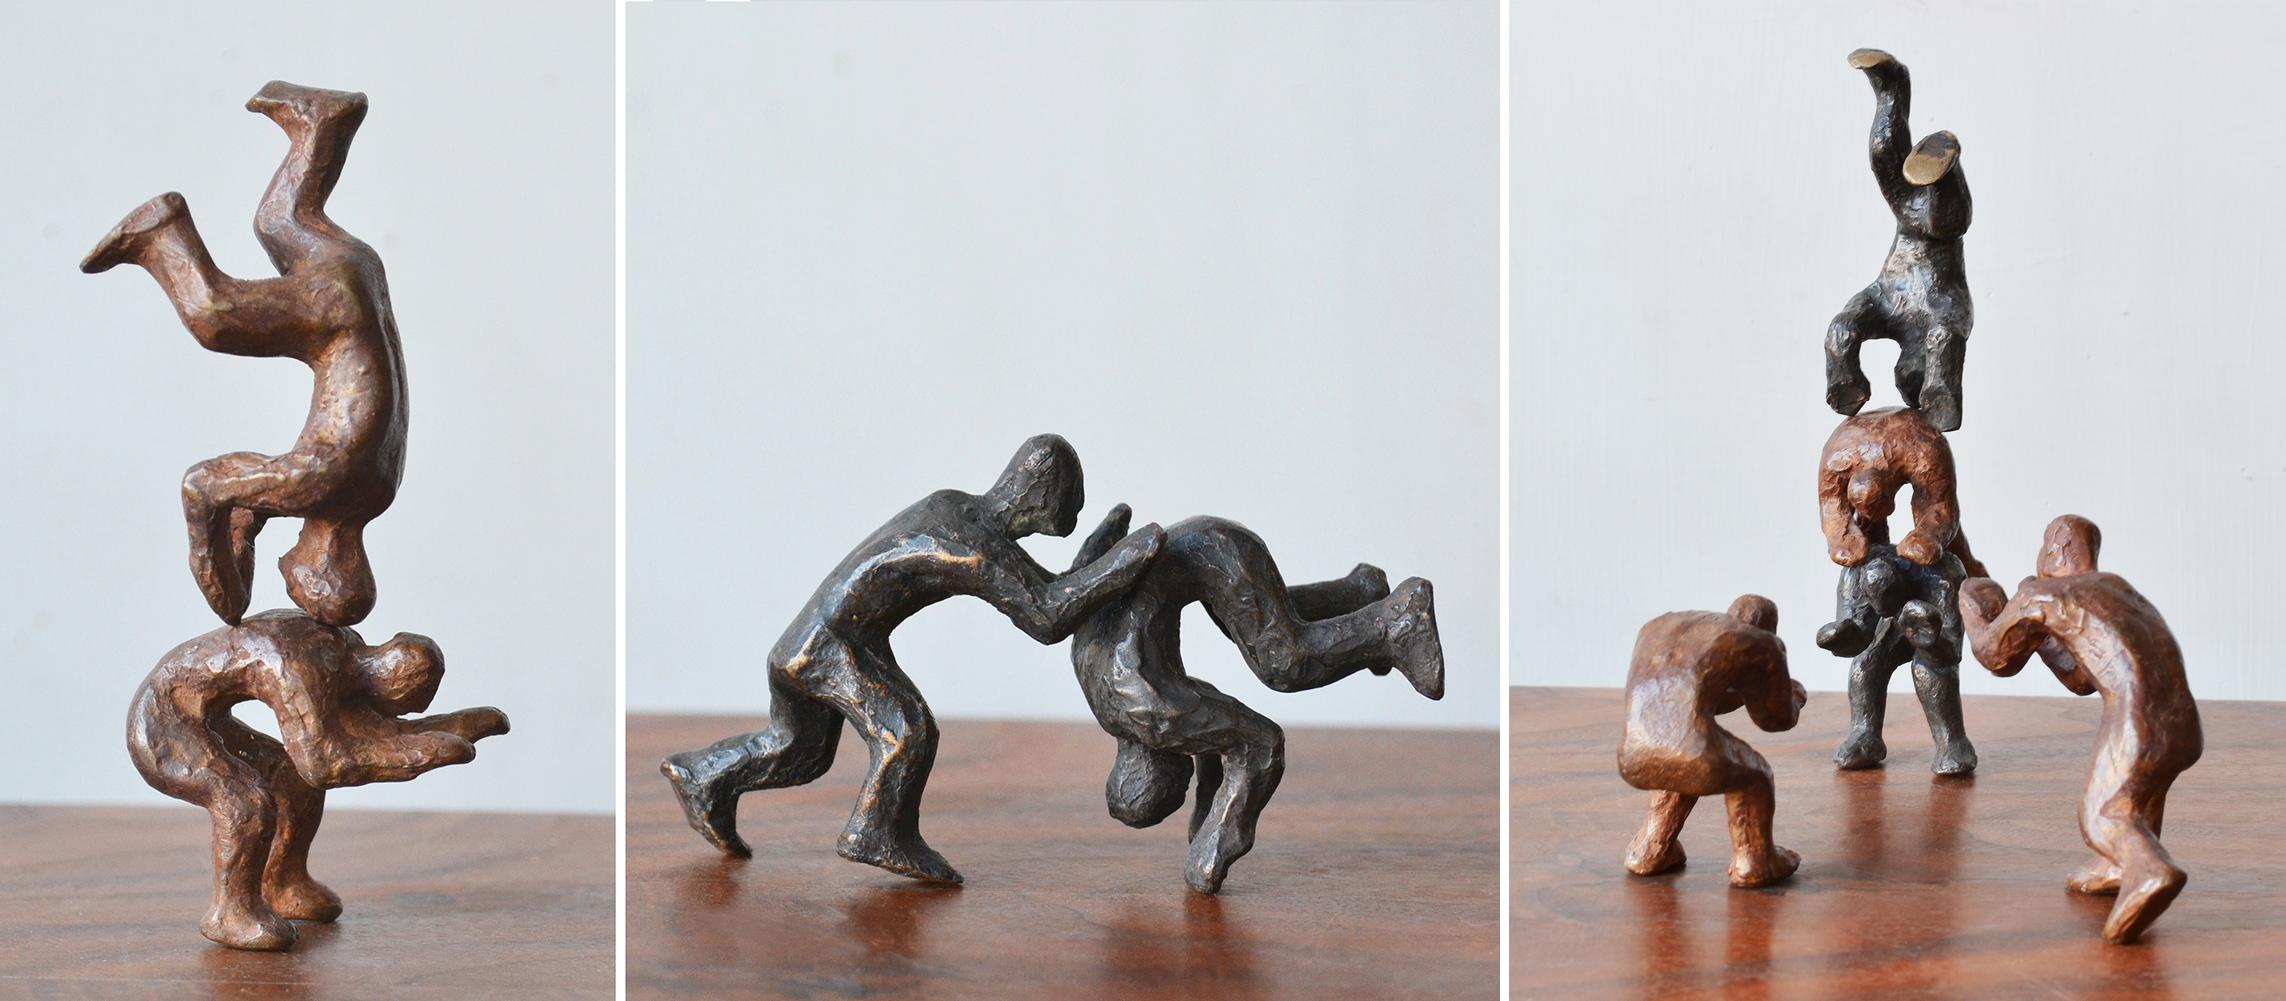 Noa Bornstein Figurative Sculpture - Why Fight When You Can Play? 2 Pairs of interactive miniature bronze figures 